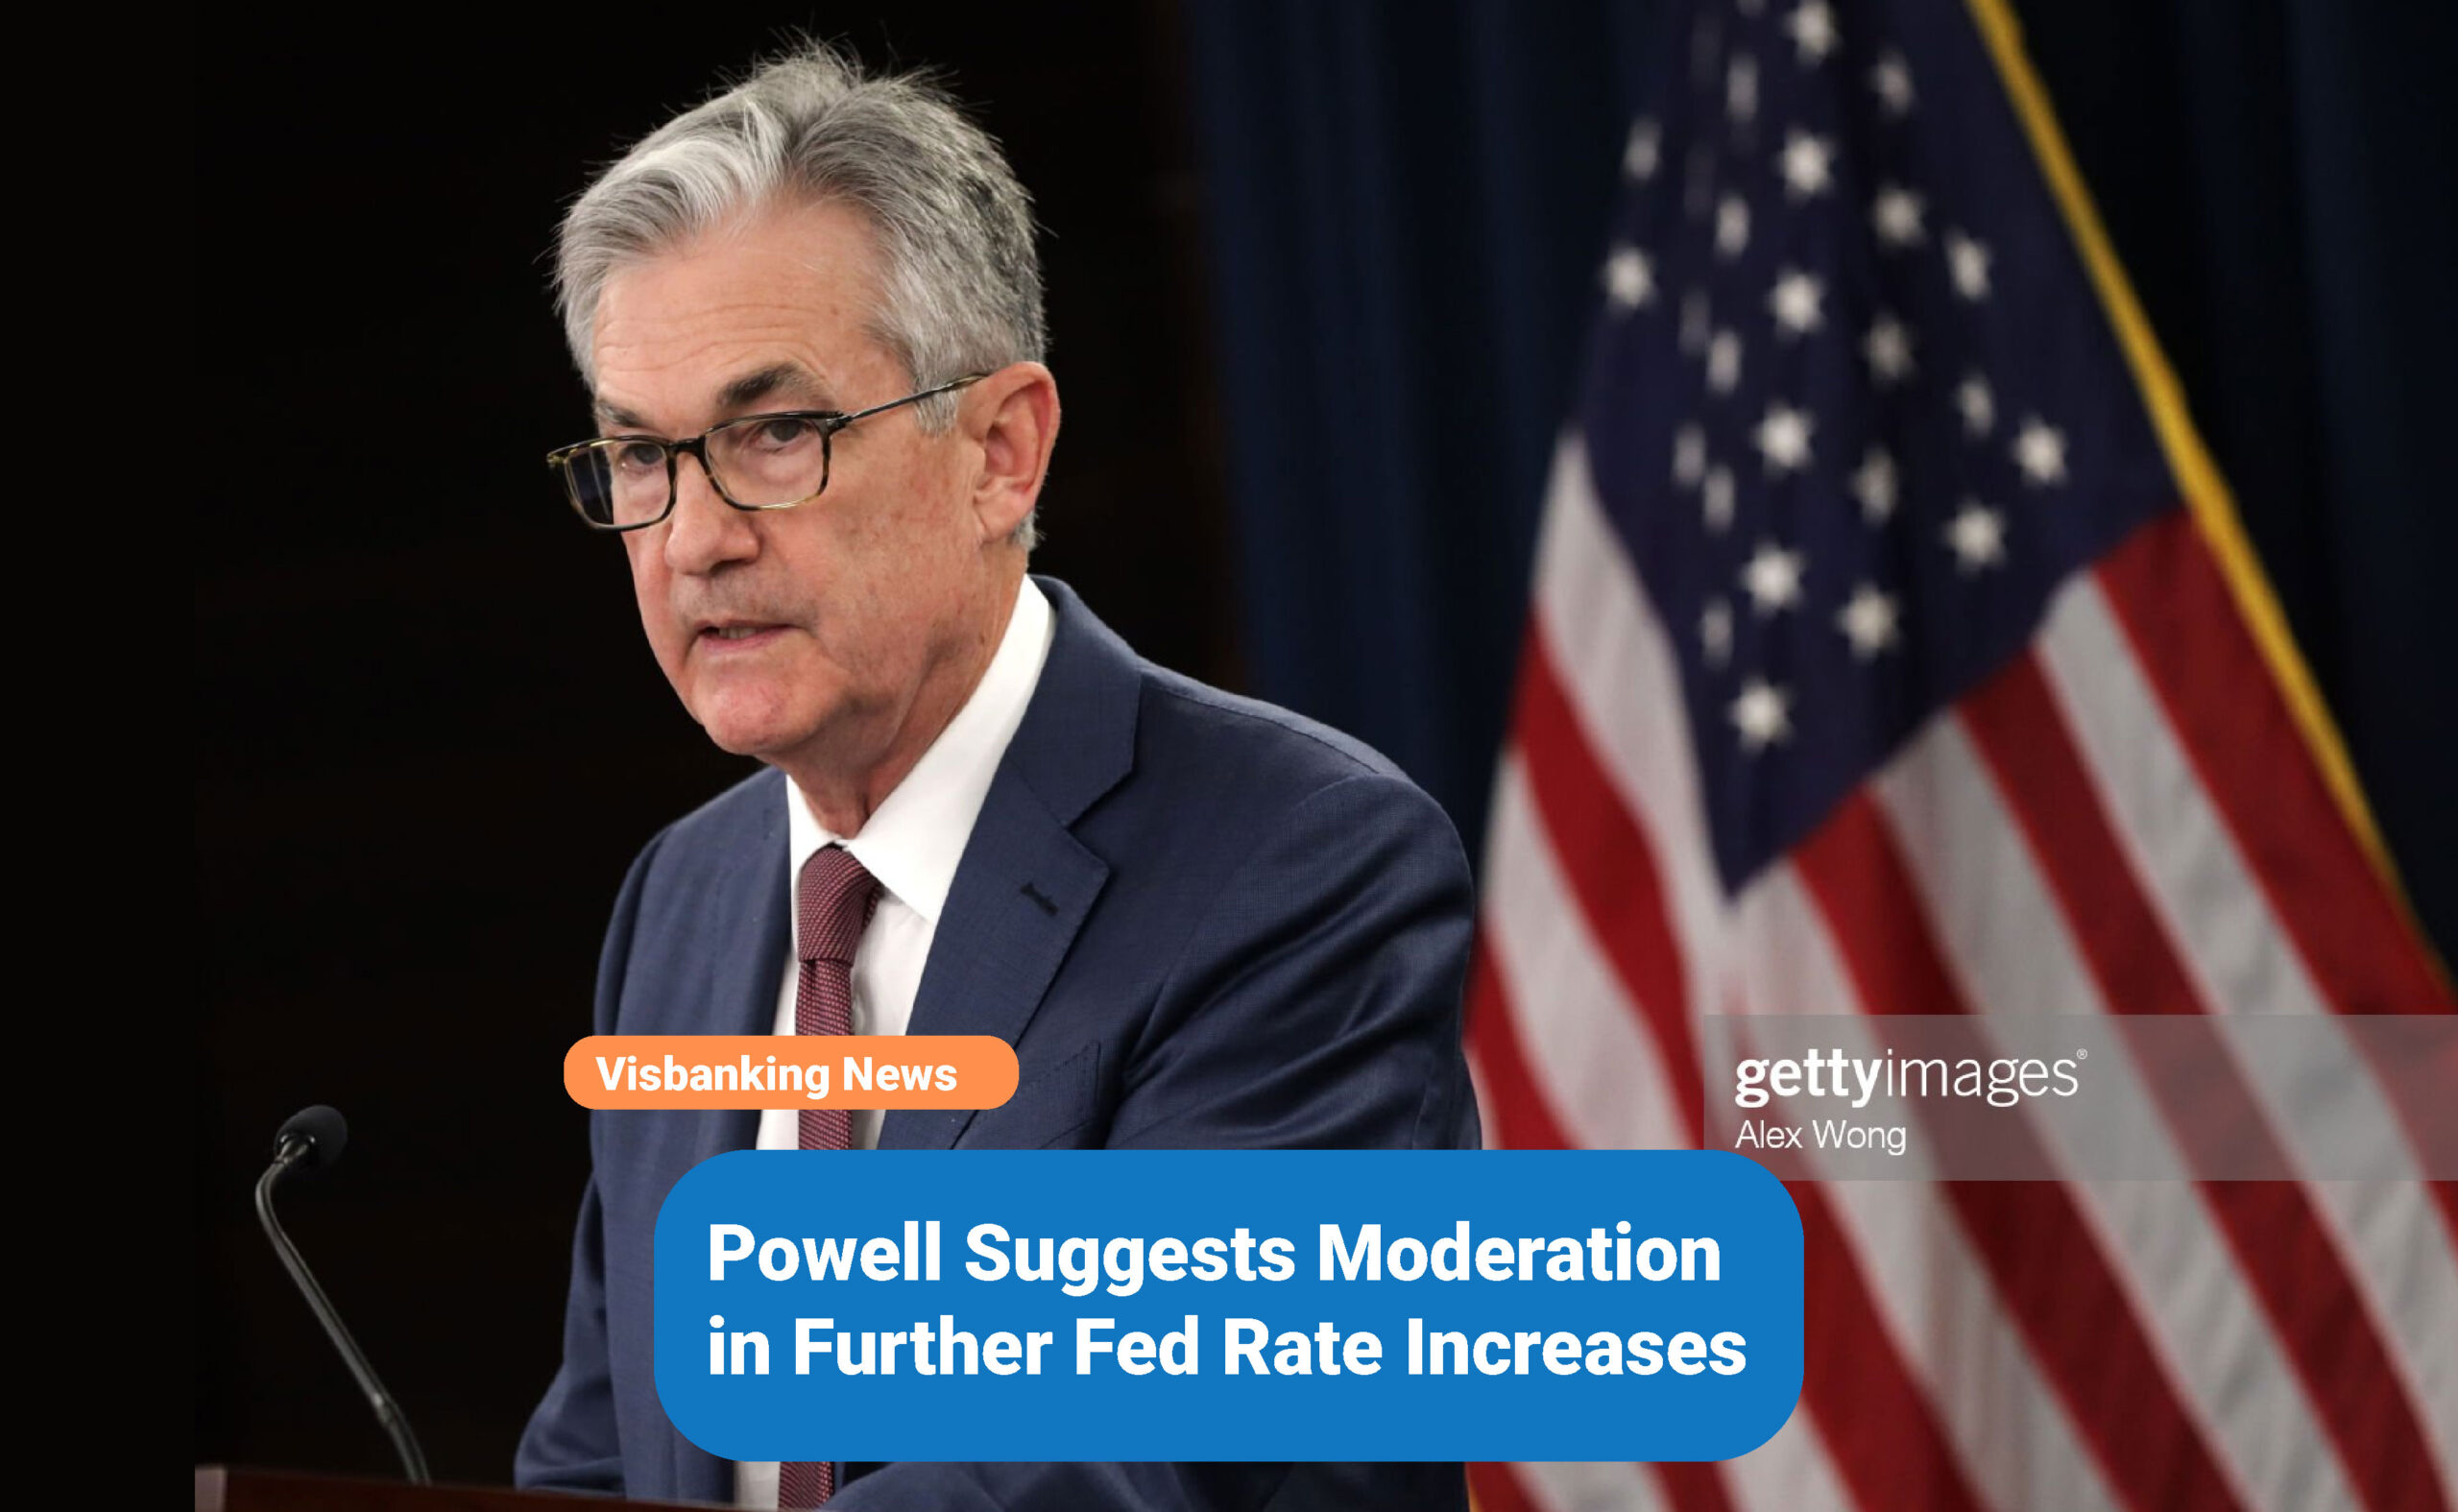 Powell Suggests Moderation in Further Fed Rate Increases